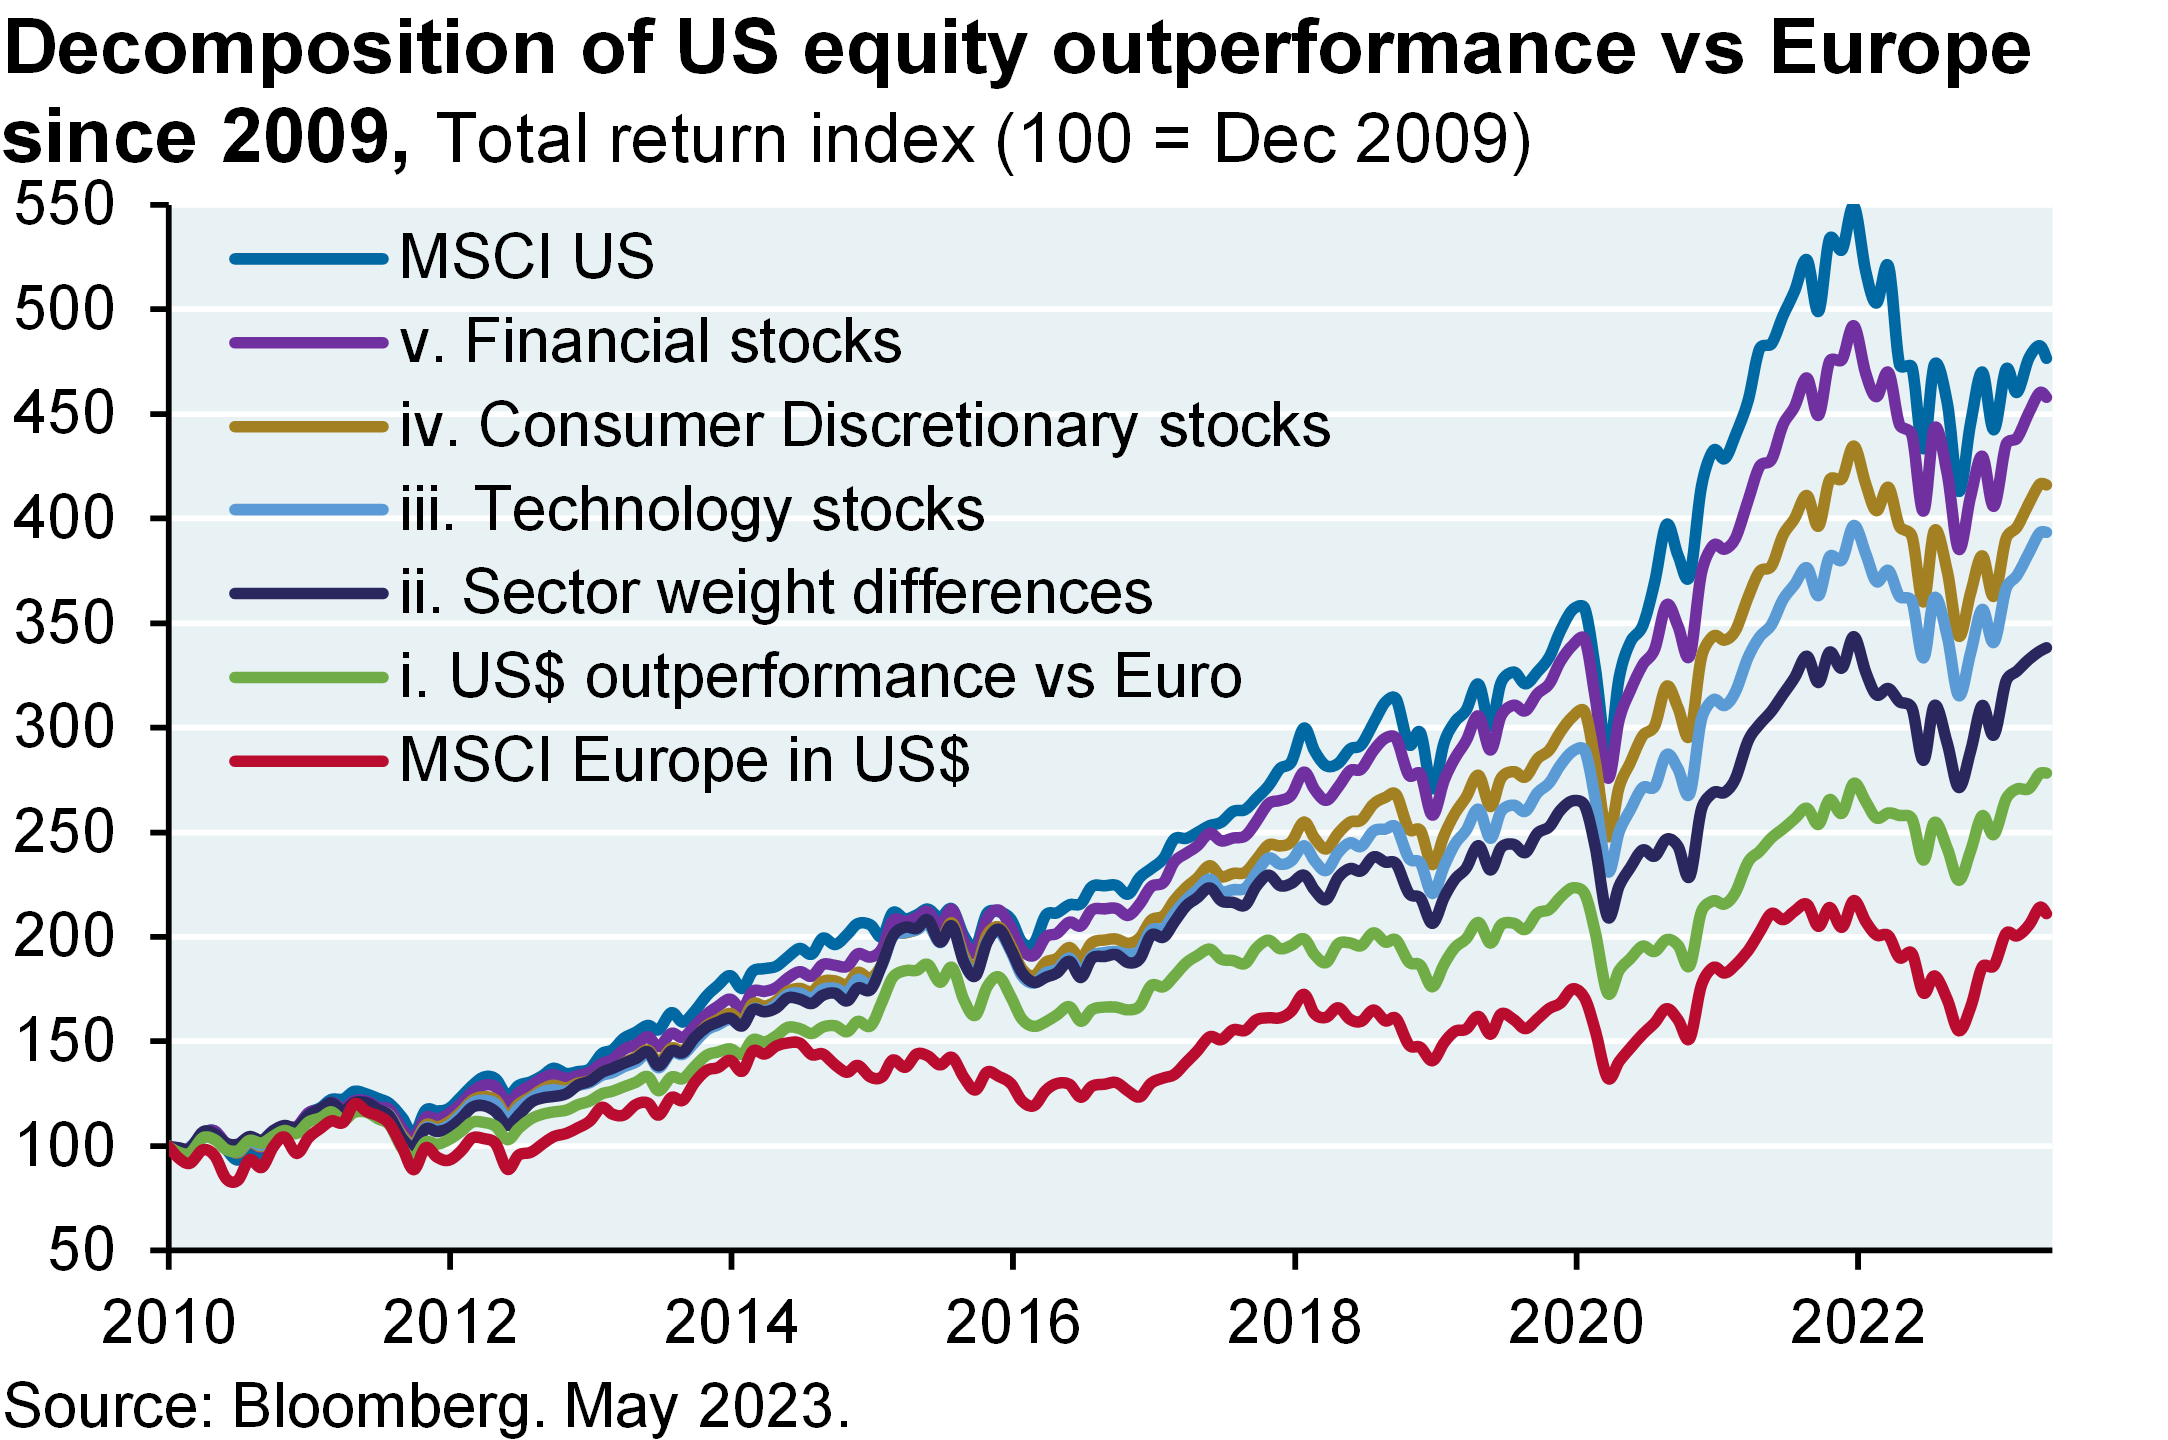 Decomposition of US equity outperformance vs Europe since 2009